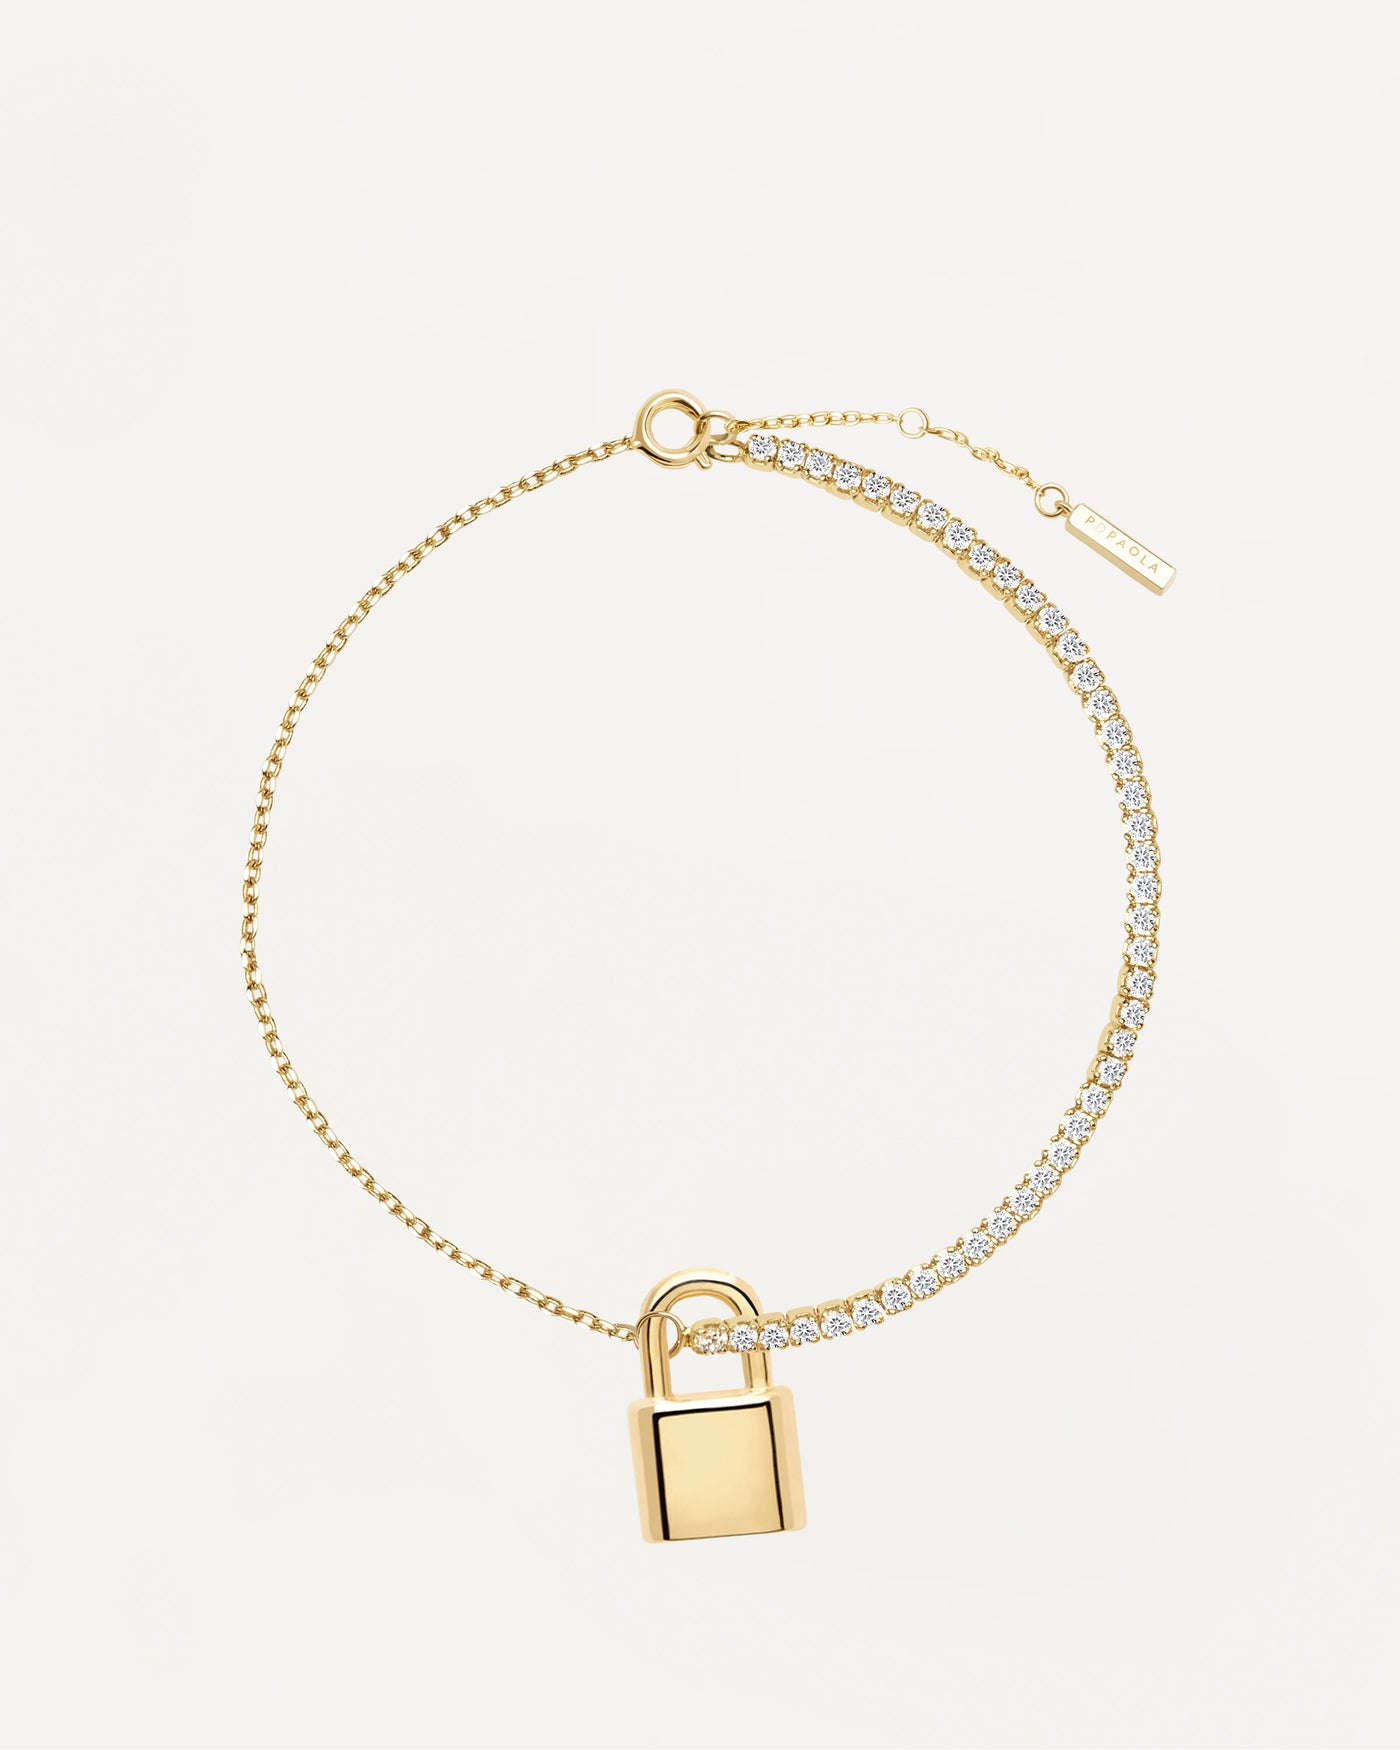 2023 Selection | Bond Bracelet. Gold-plated silver bracelet with white zirconia and personalized padlock pendant. Get the latest arrival from PDPAOLA. Place your order safely and get this Best Seller. Free Shipping.